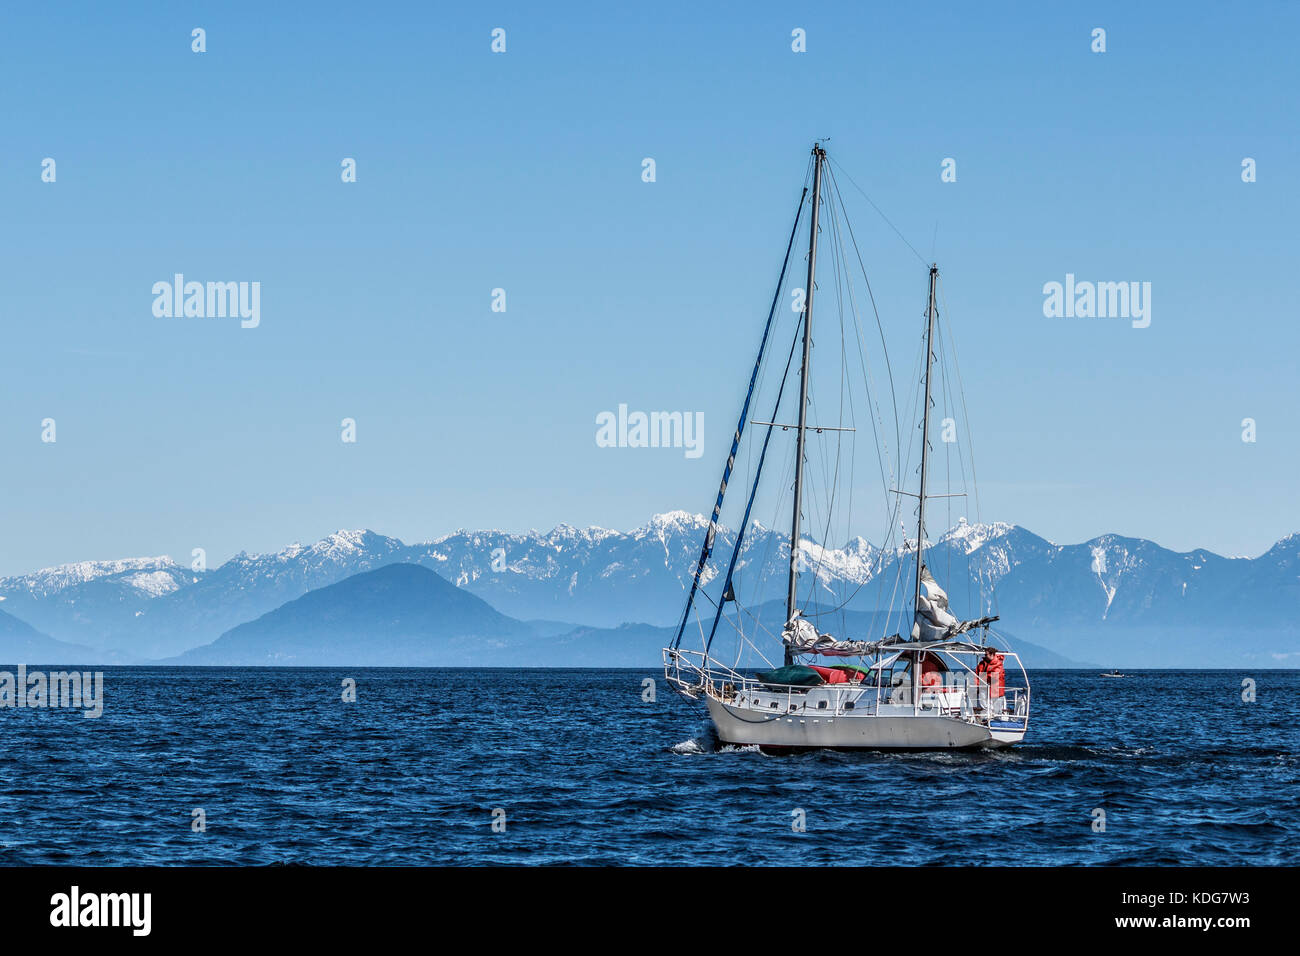 A sailboat sets out across BC's Strait of Georgia on a cold, clear day in early spring (Bowen Island, Howe Sound and Coast Range in background). Stock Photo